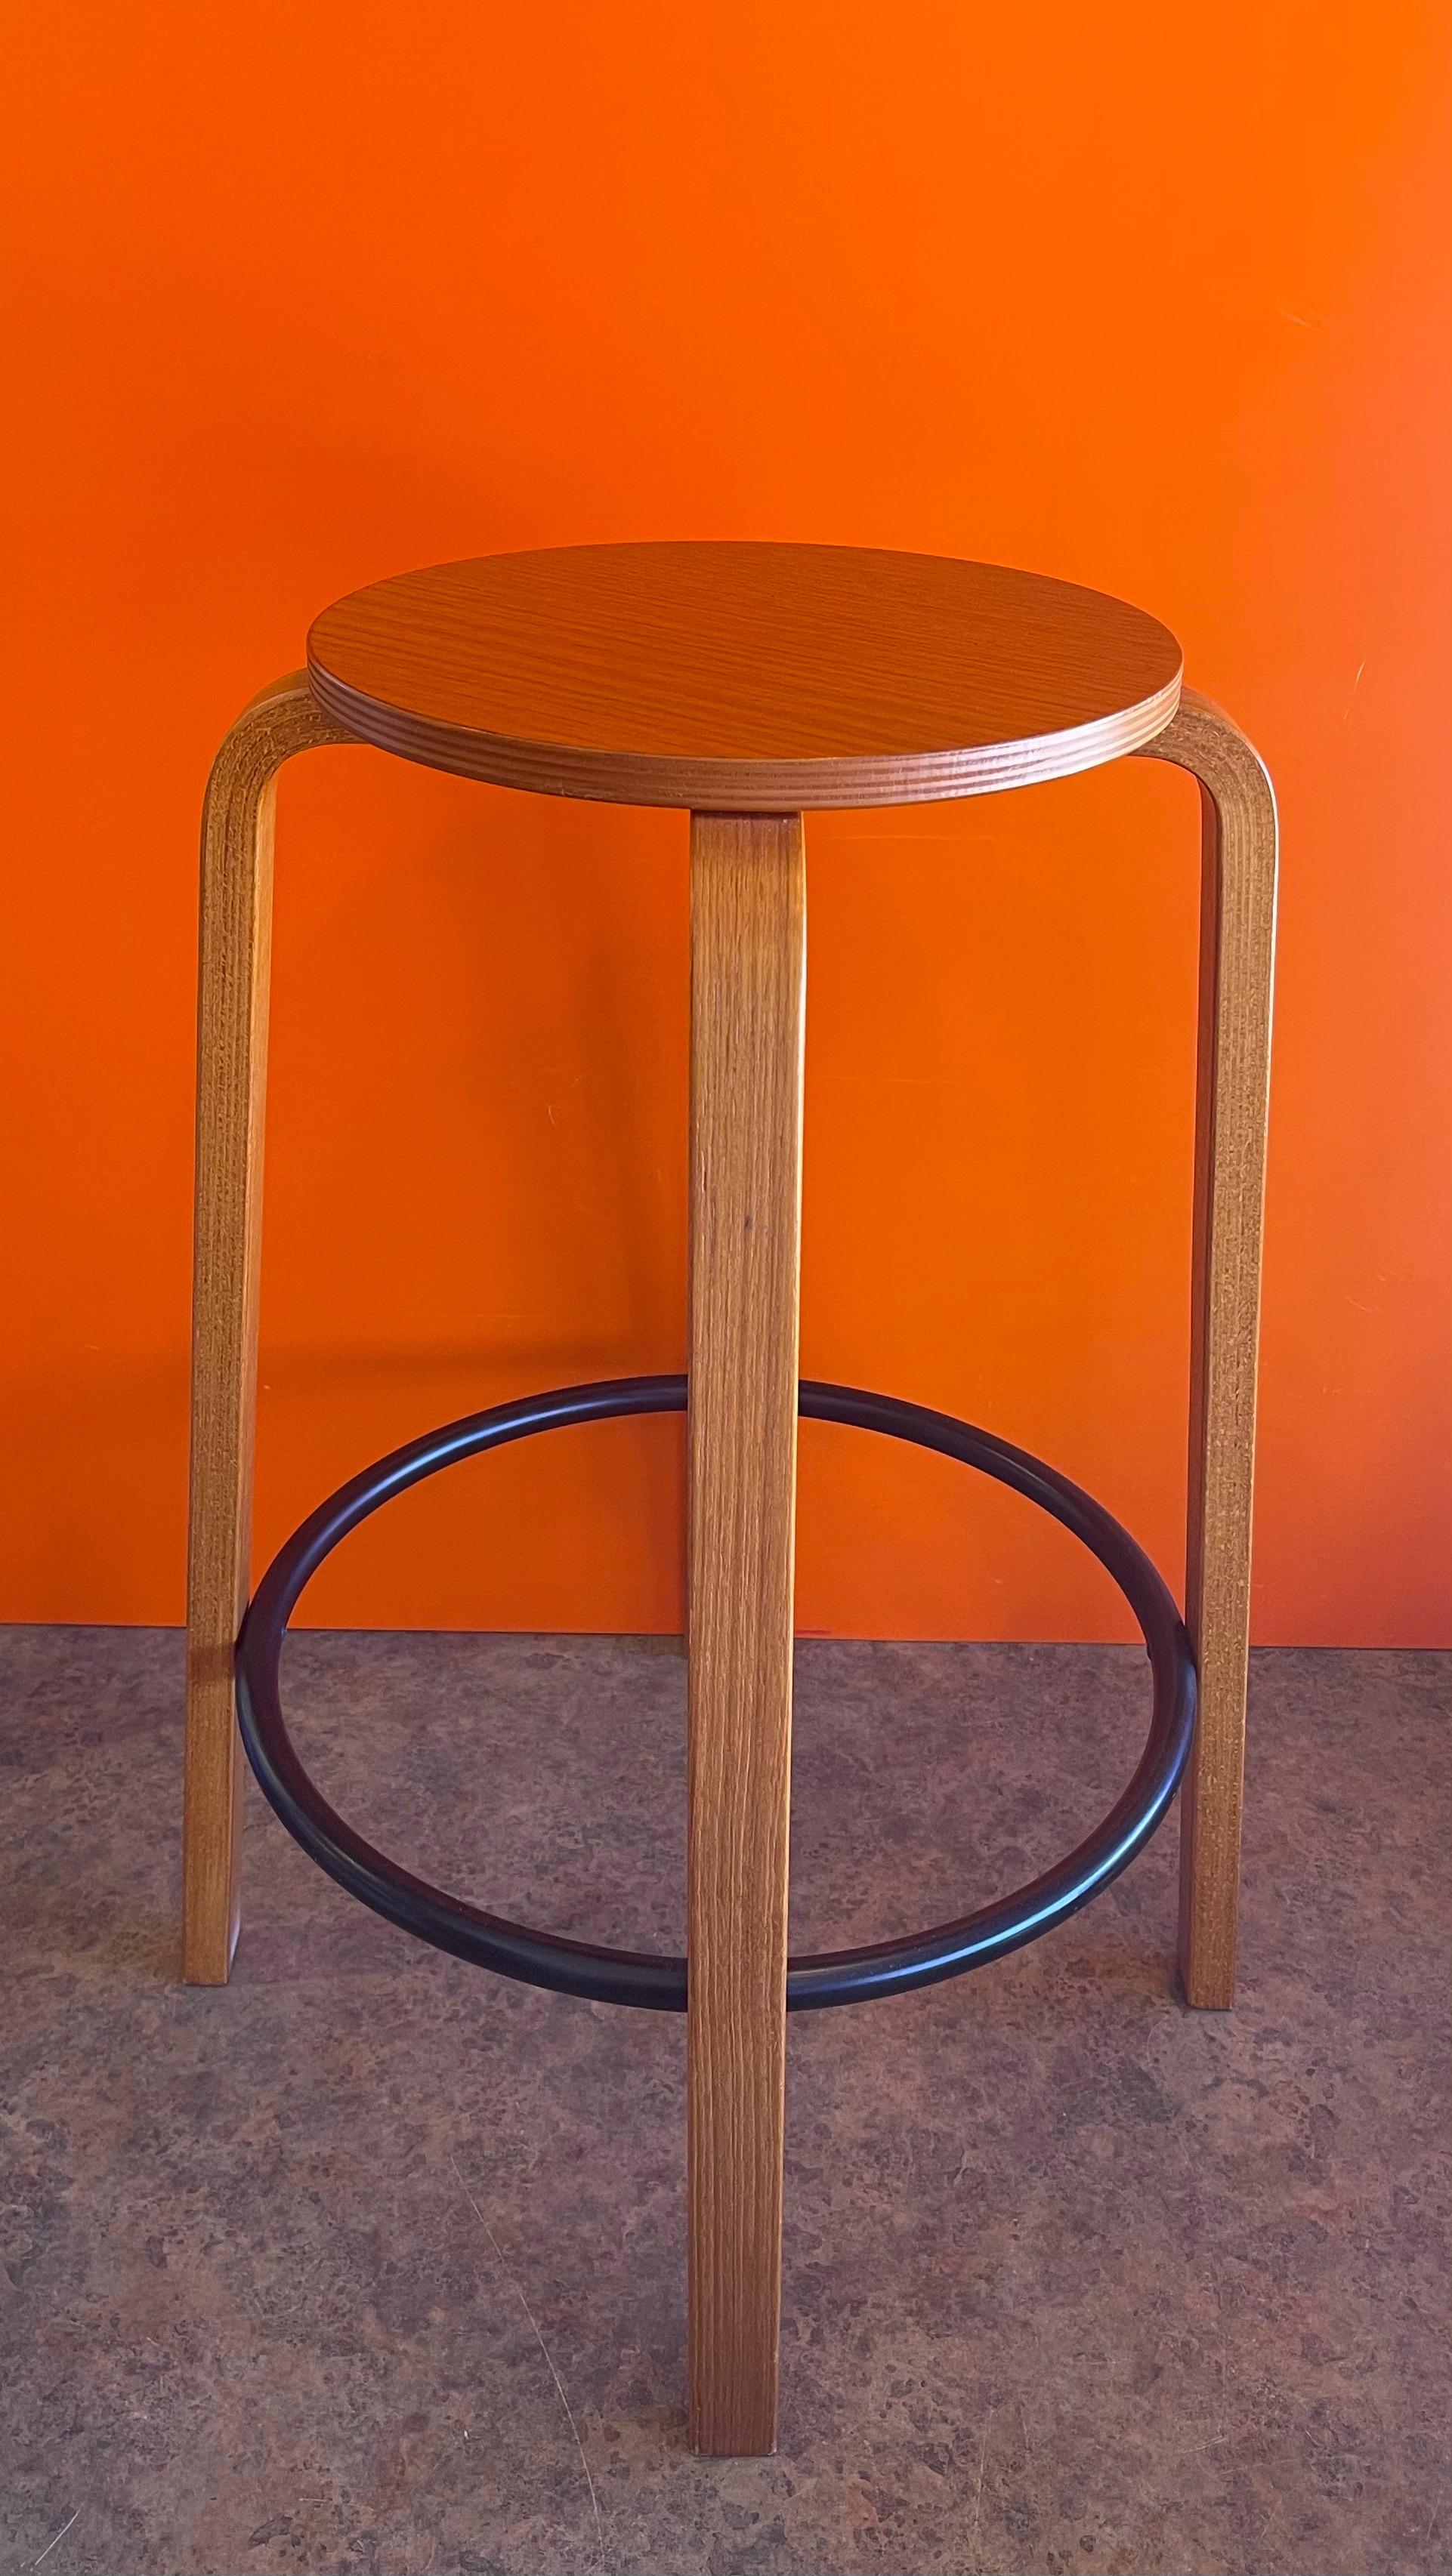 Danish Modern Teak Footrest Barstool In Good Condition For Sale In San Diego, CA